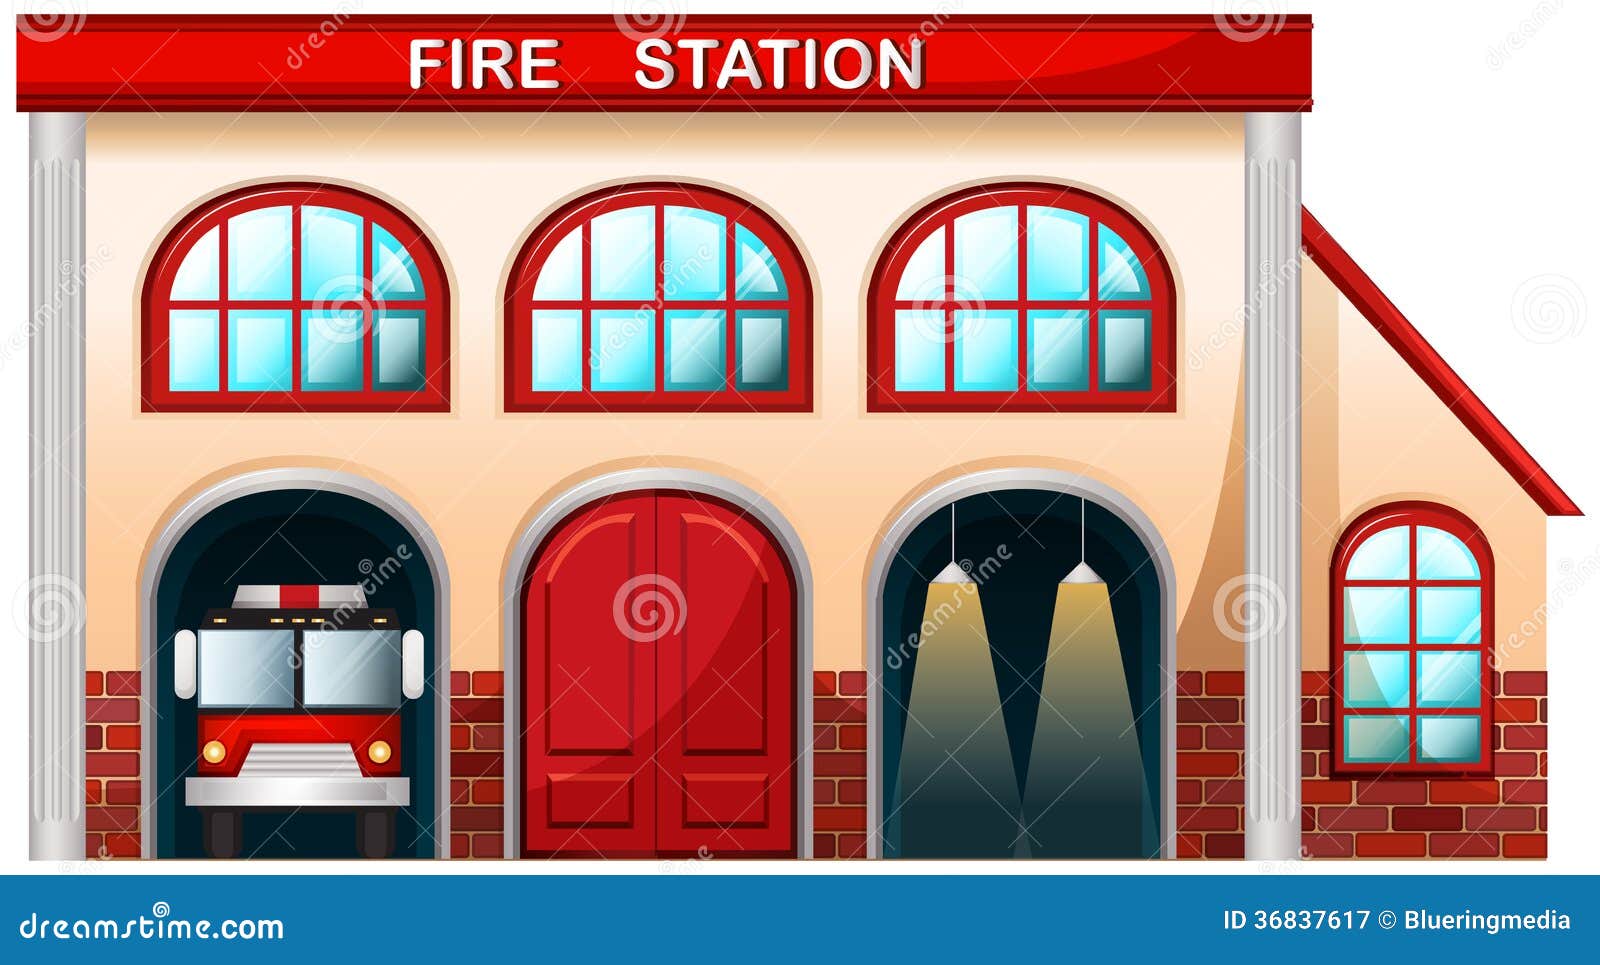 fire house clipart - photo #31